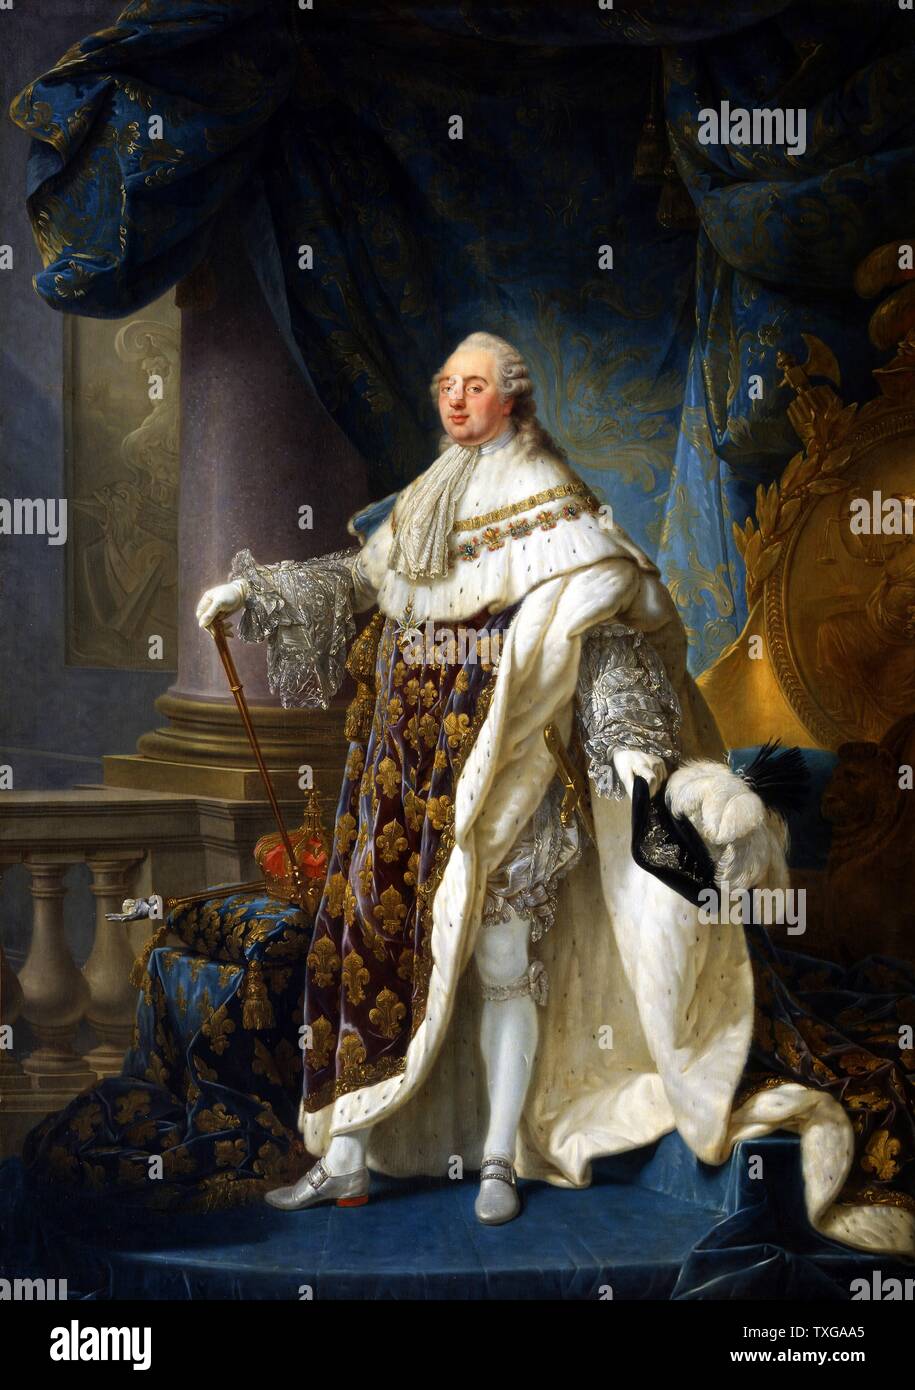 Antoine-François Callet French school Louis XVI, King of France, wearing his Grand Royal costume 1779 Oil on canvas (278 x 196 cm) Versailles, Museum of the Castle Stock Photo